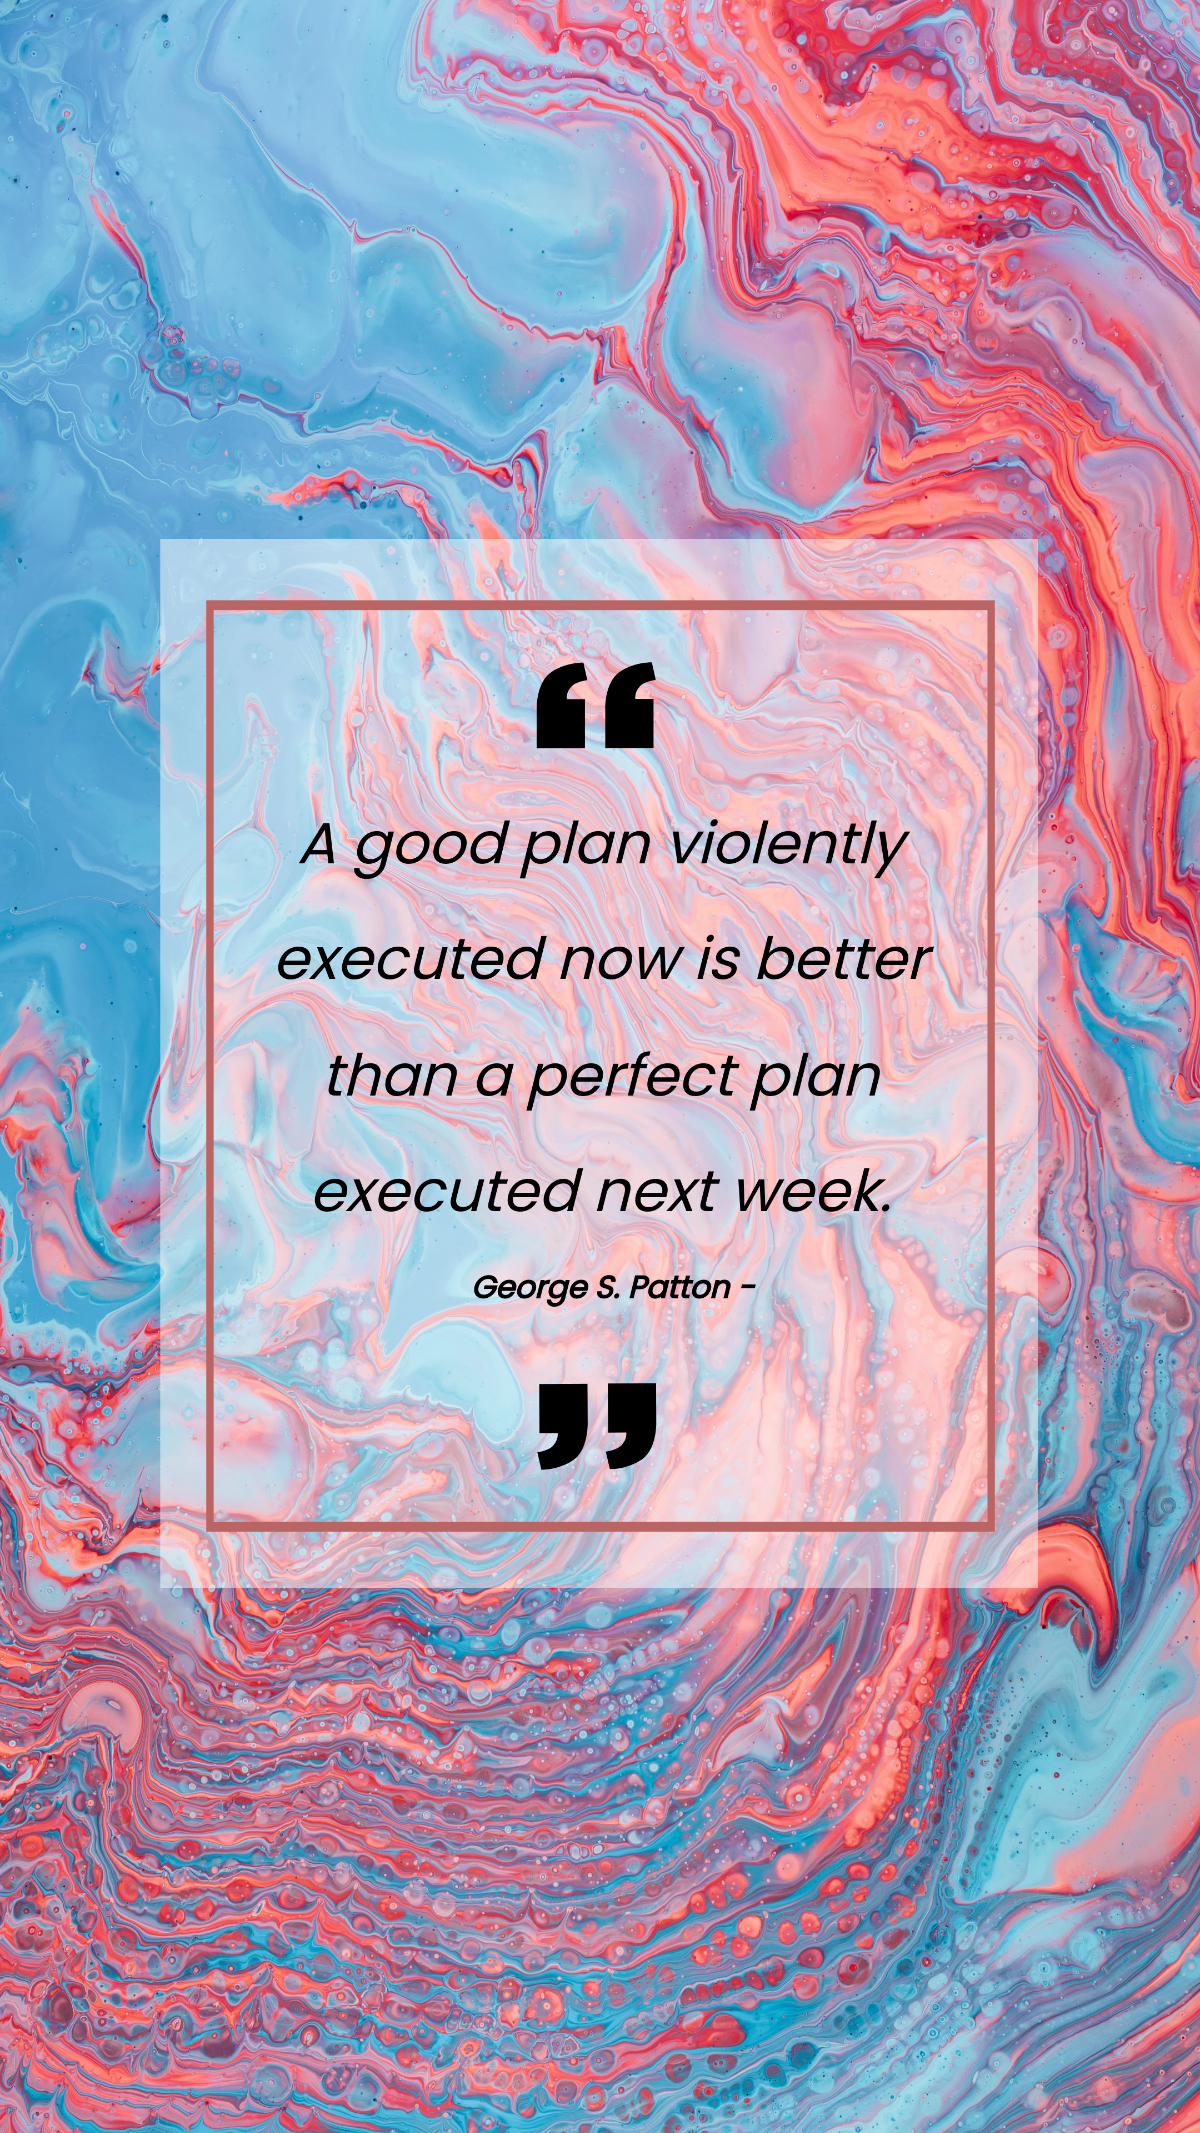 George S. Patton - A good plan violently executed now is better than a perfect plan executed next week.